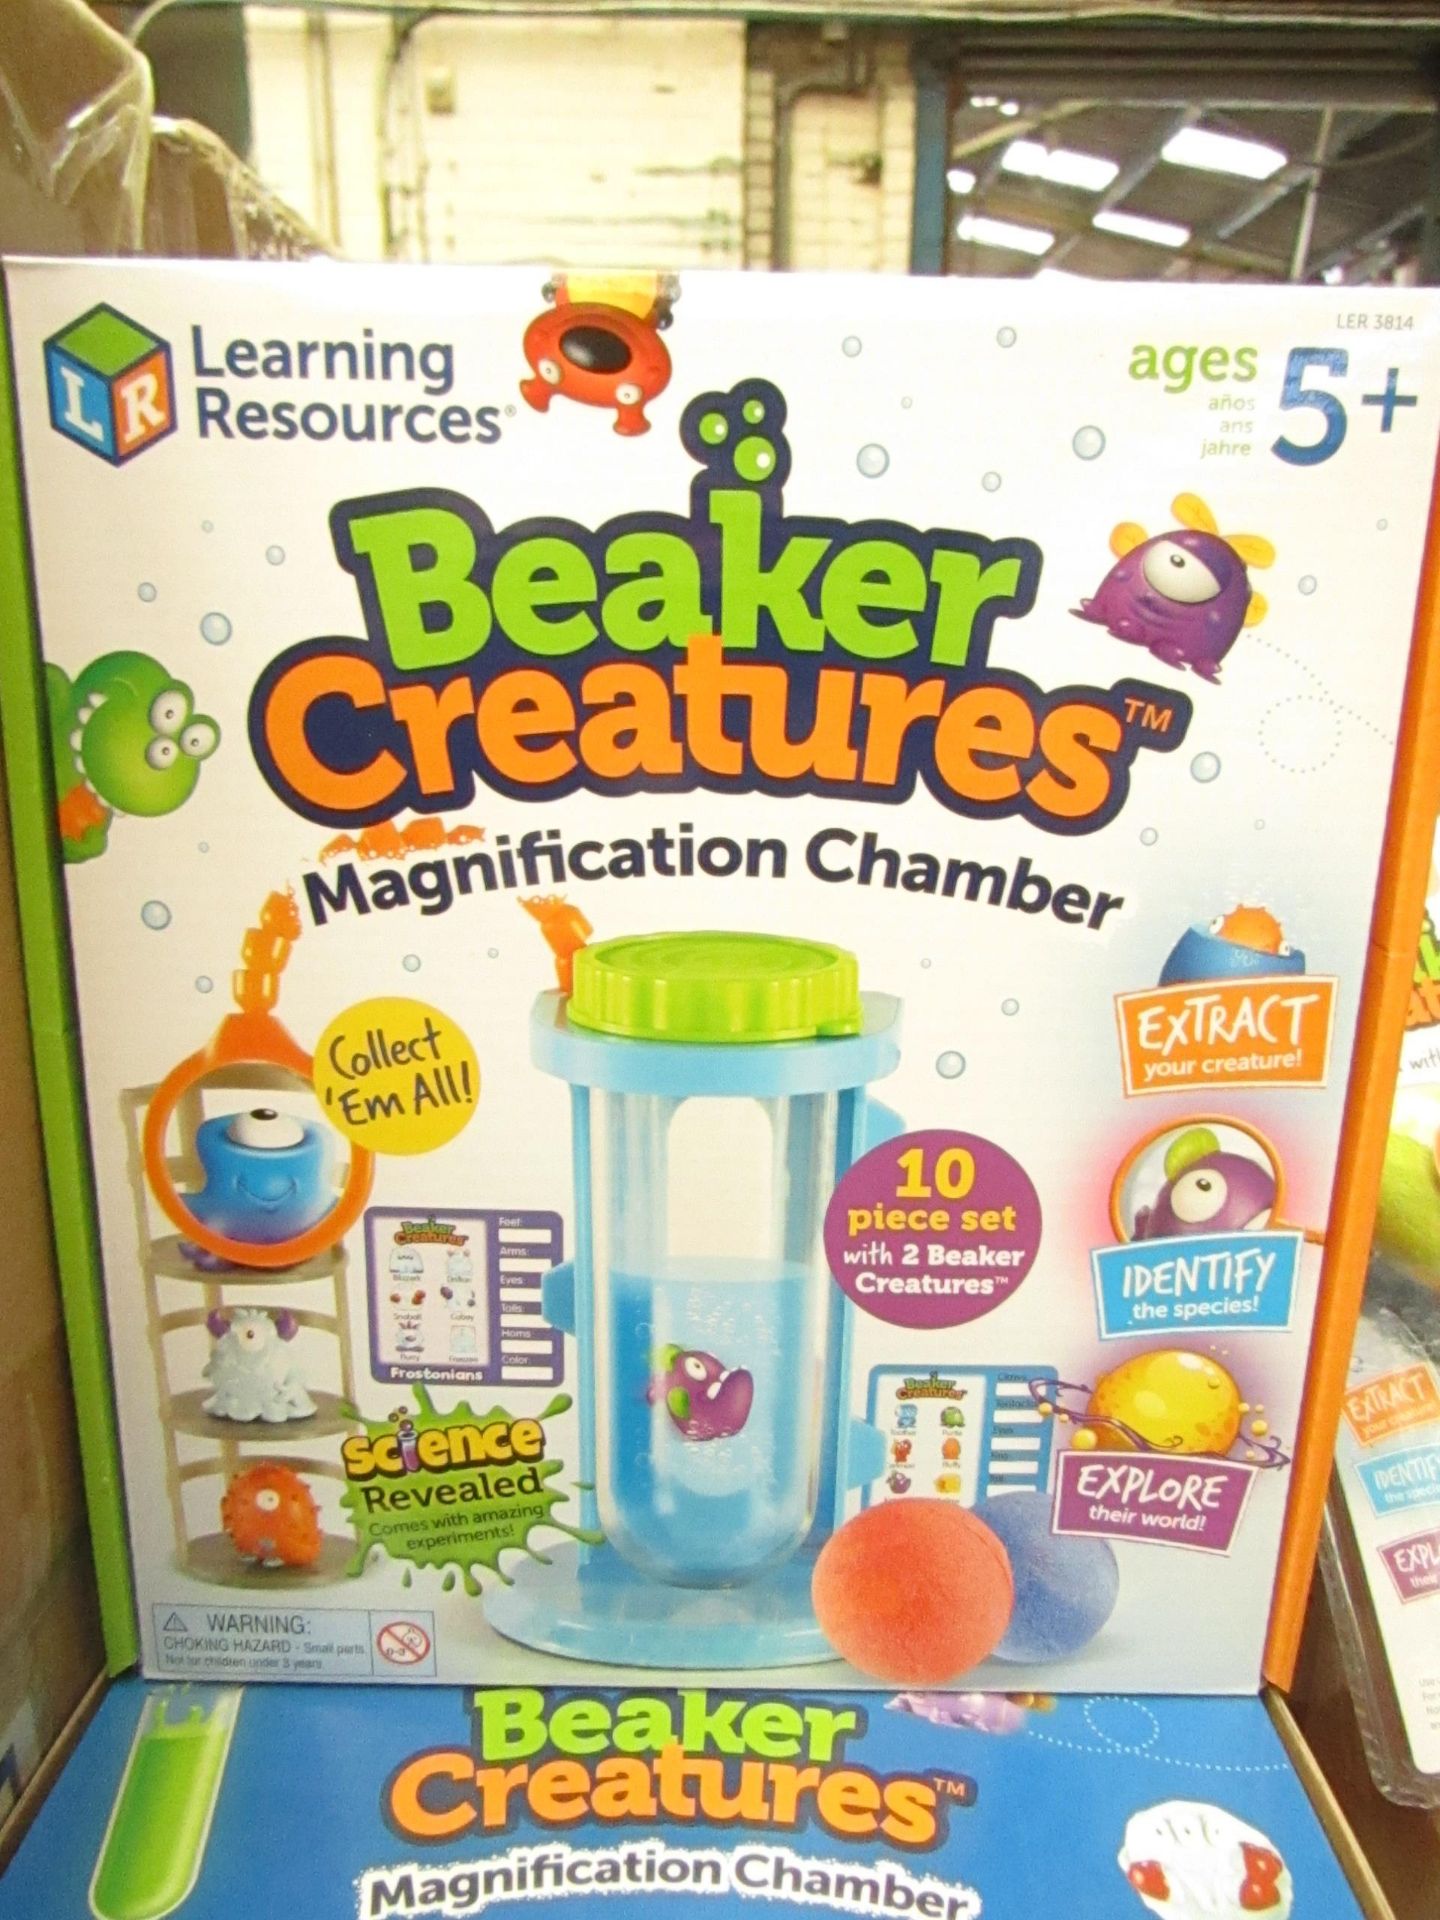 Learning Resources Beaker Creatures Magnification Chamber. New & Boxed